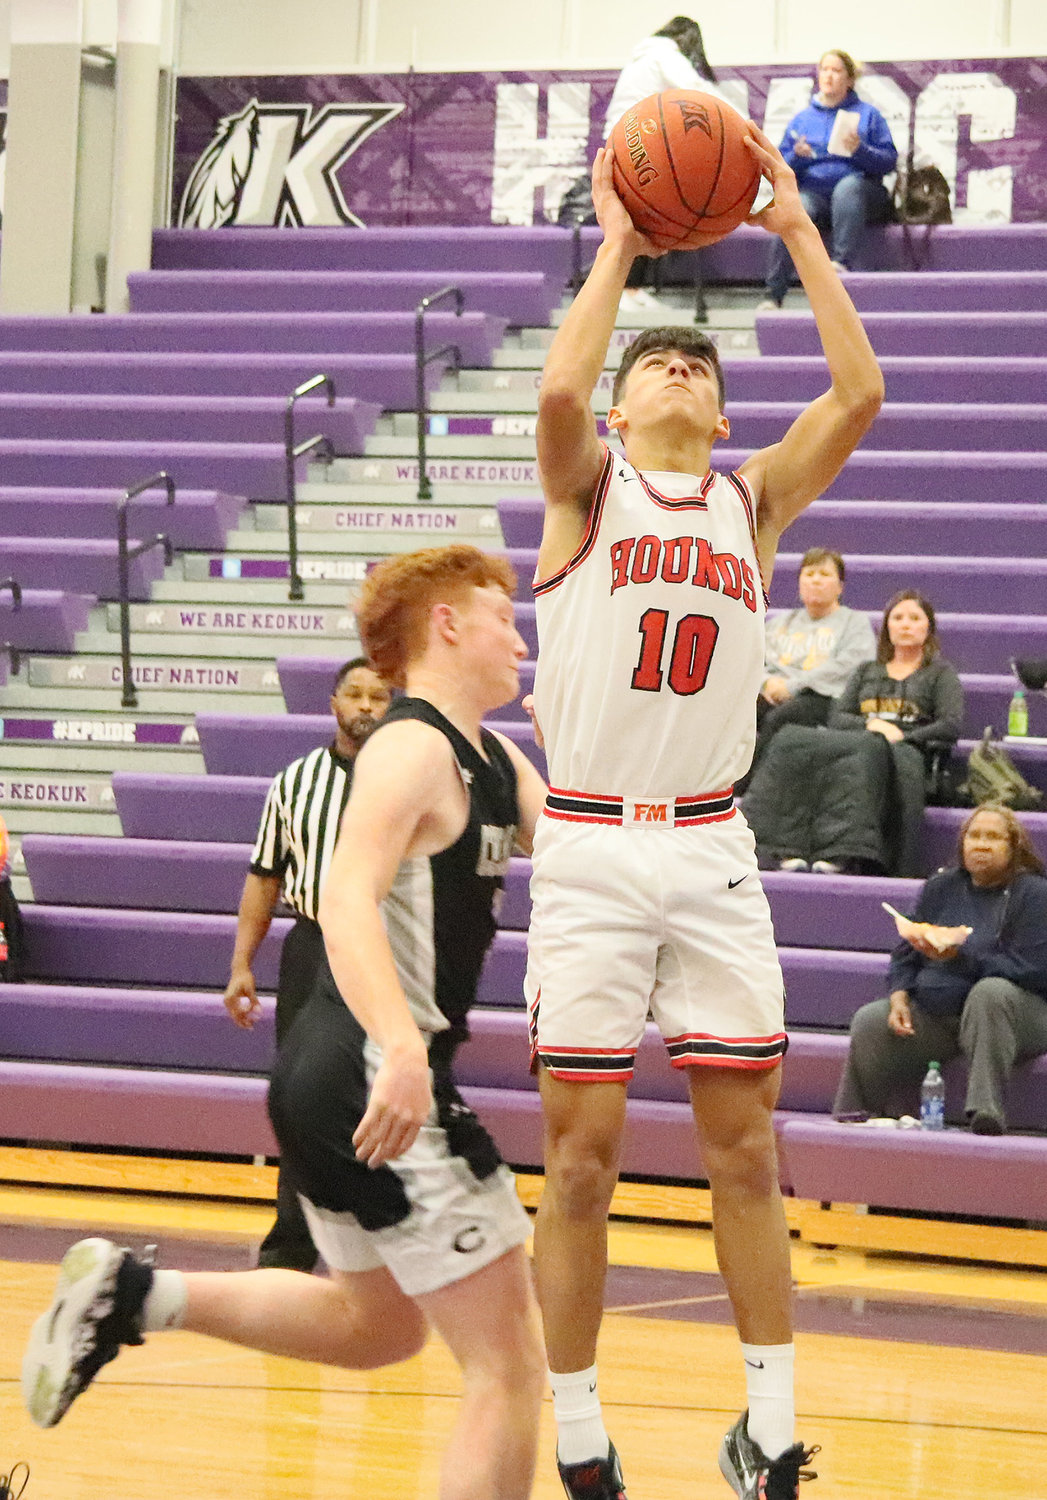 Leif Boeding (10) pulls up for a short jumper Saturday at Keokuk High School. Boeding finished with 16 points for the Bloodhounds.